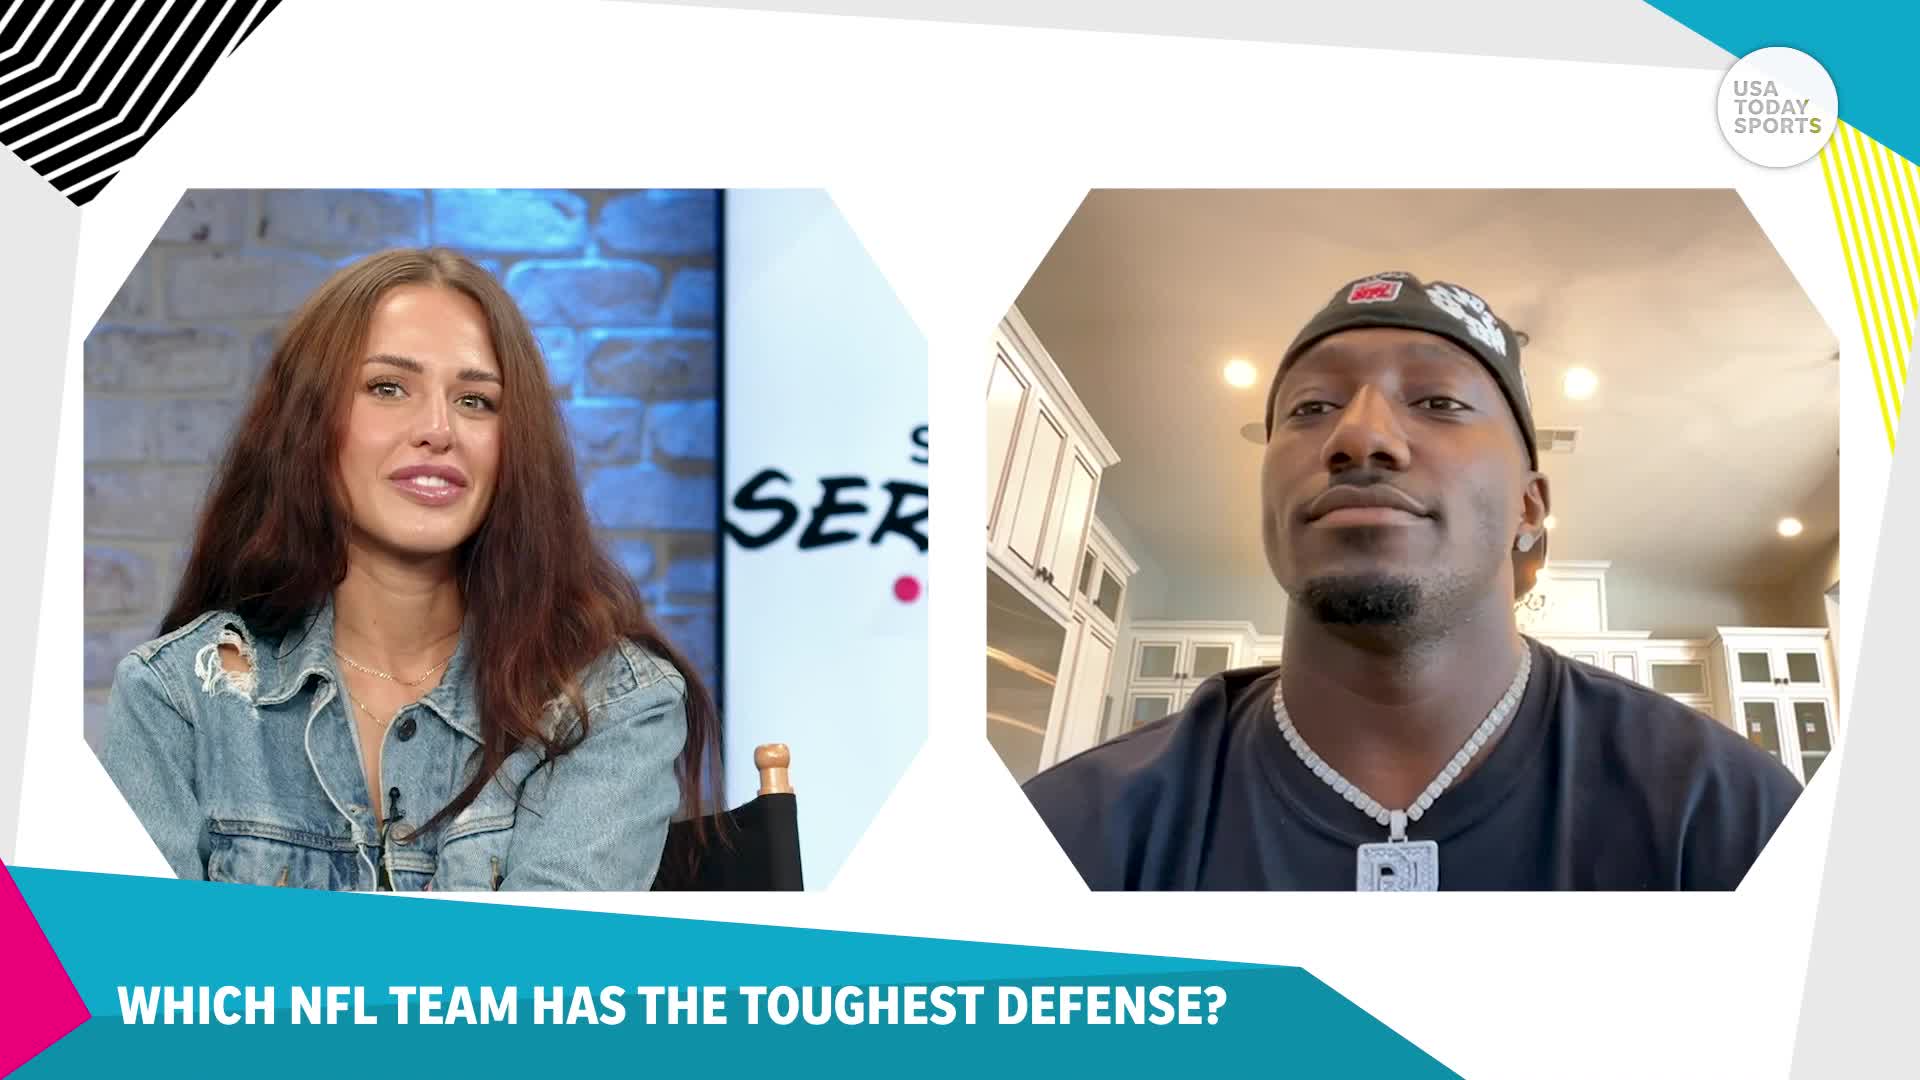 Deebo Samuel says 49ers have the strongest defense in the NFL